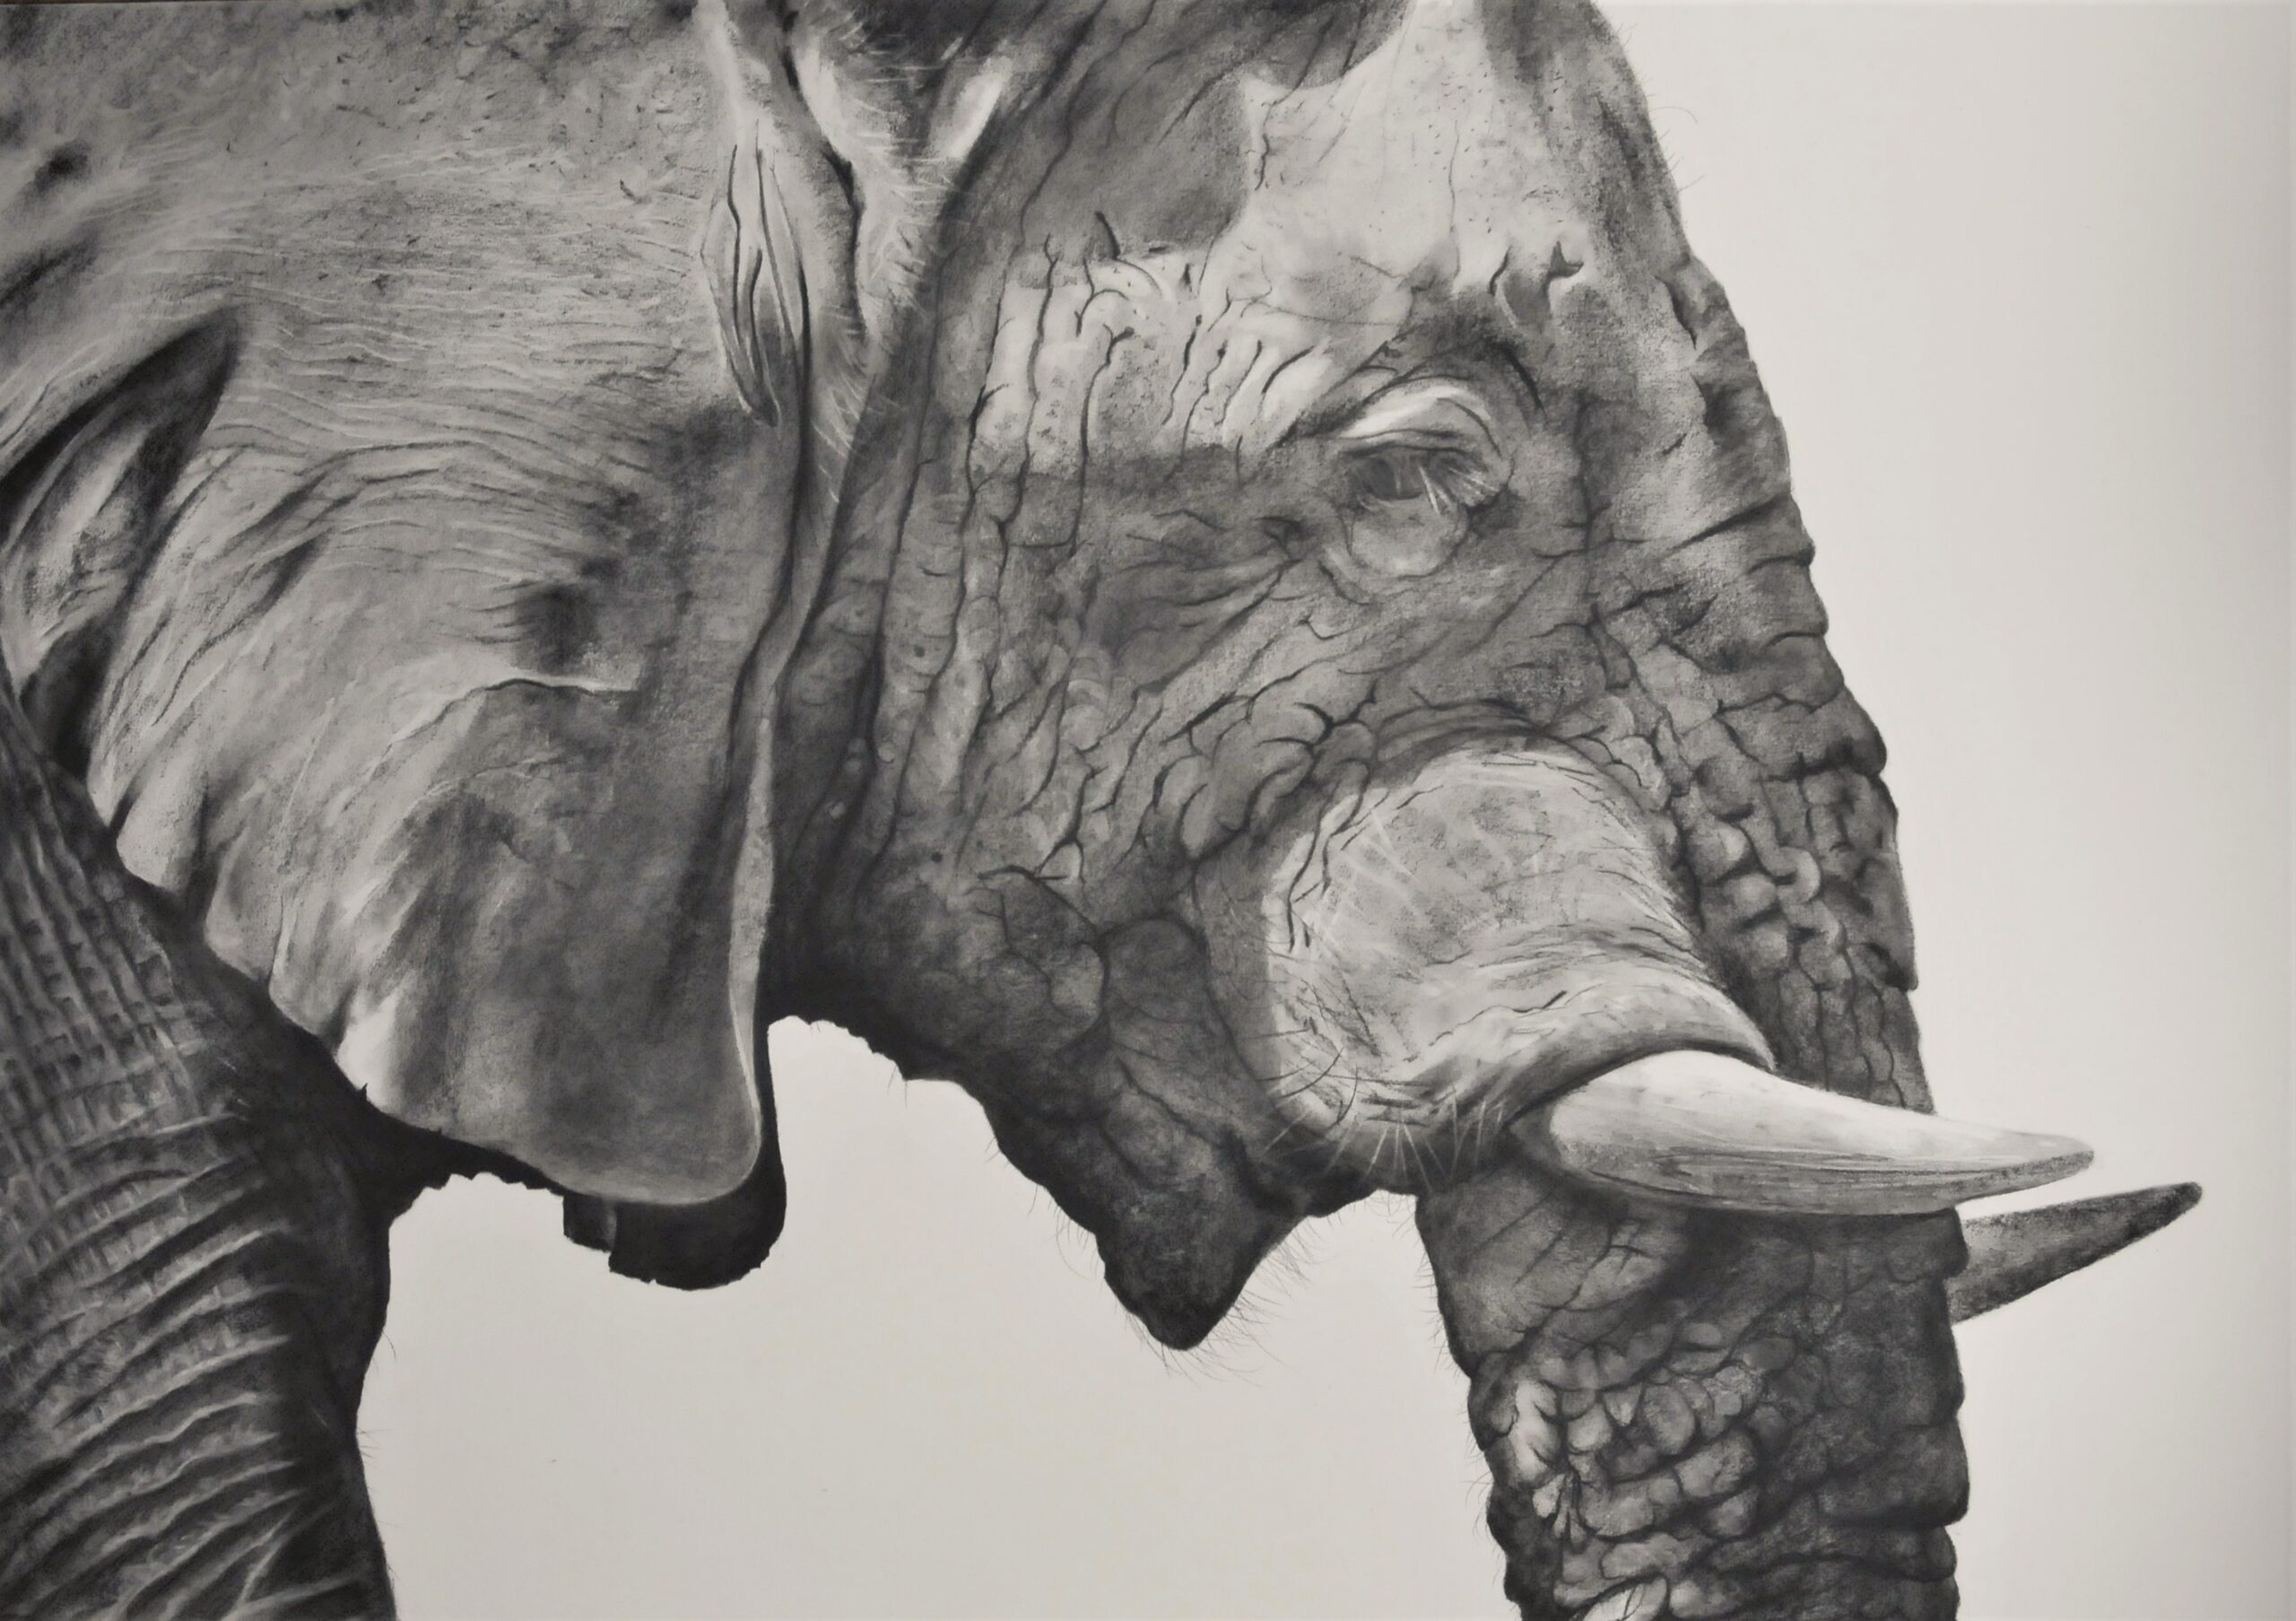 Charcoal drawing of an elephant by Will Taylor